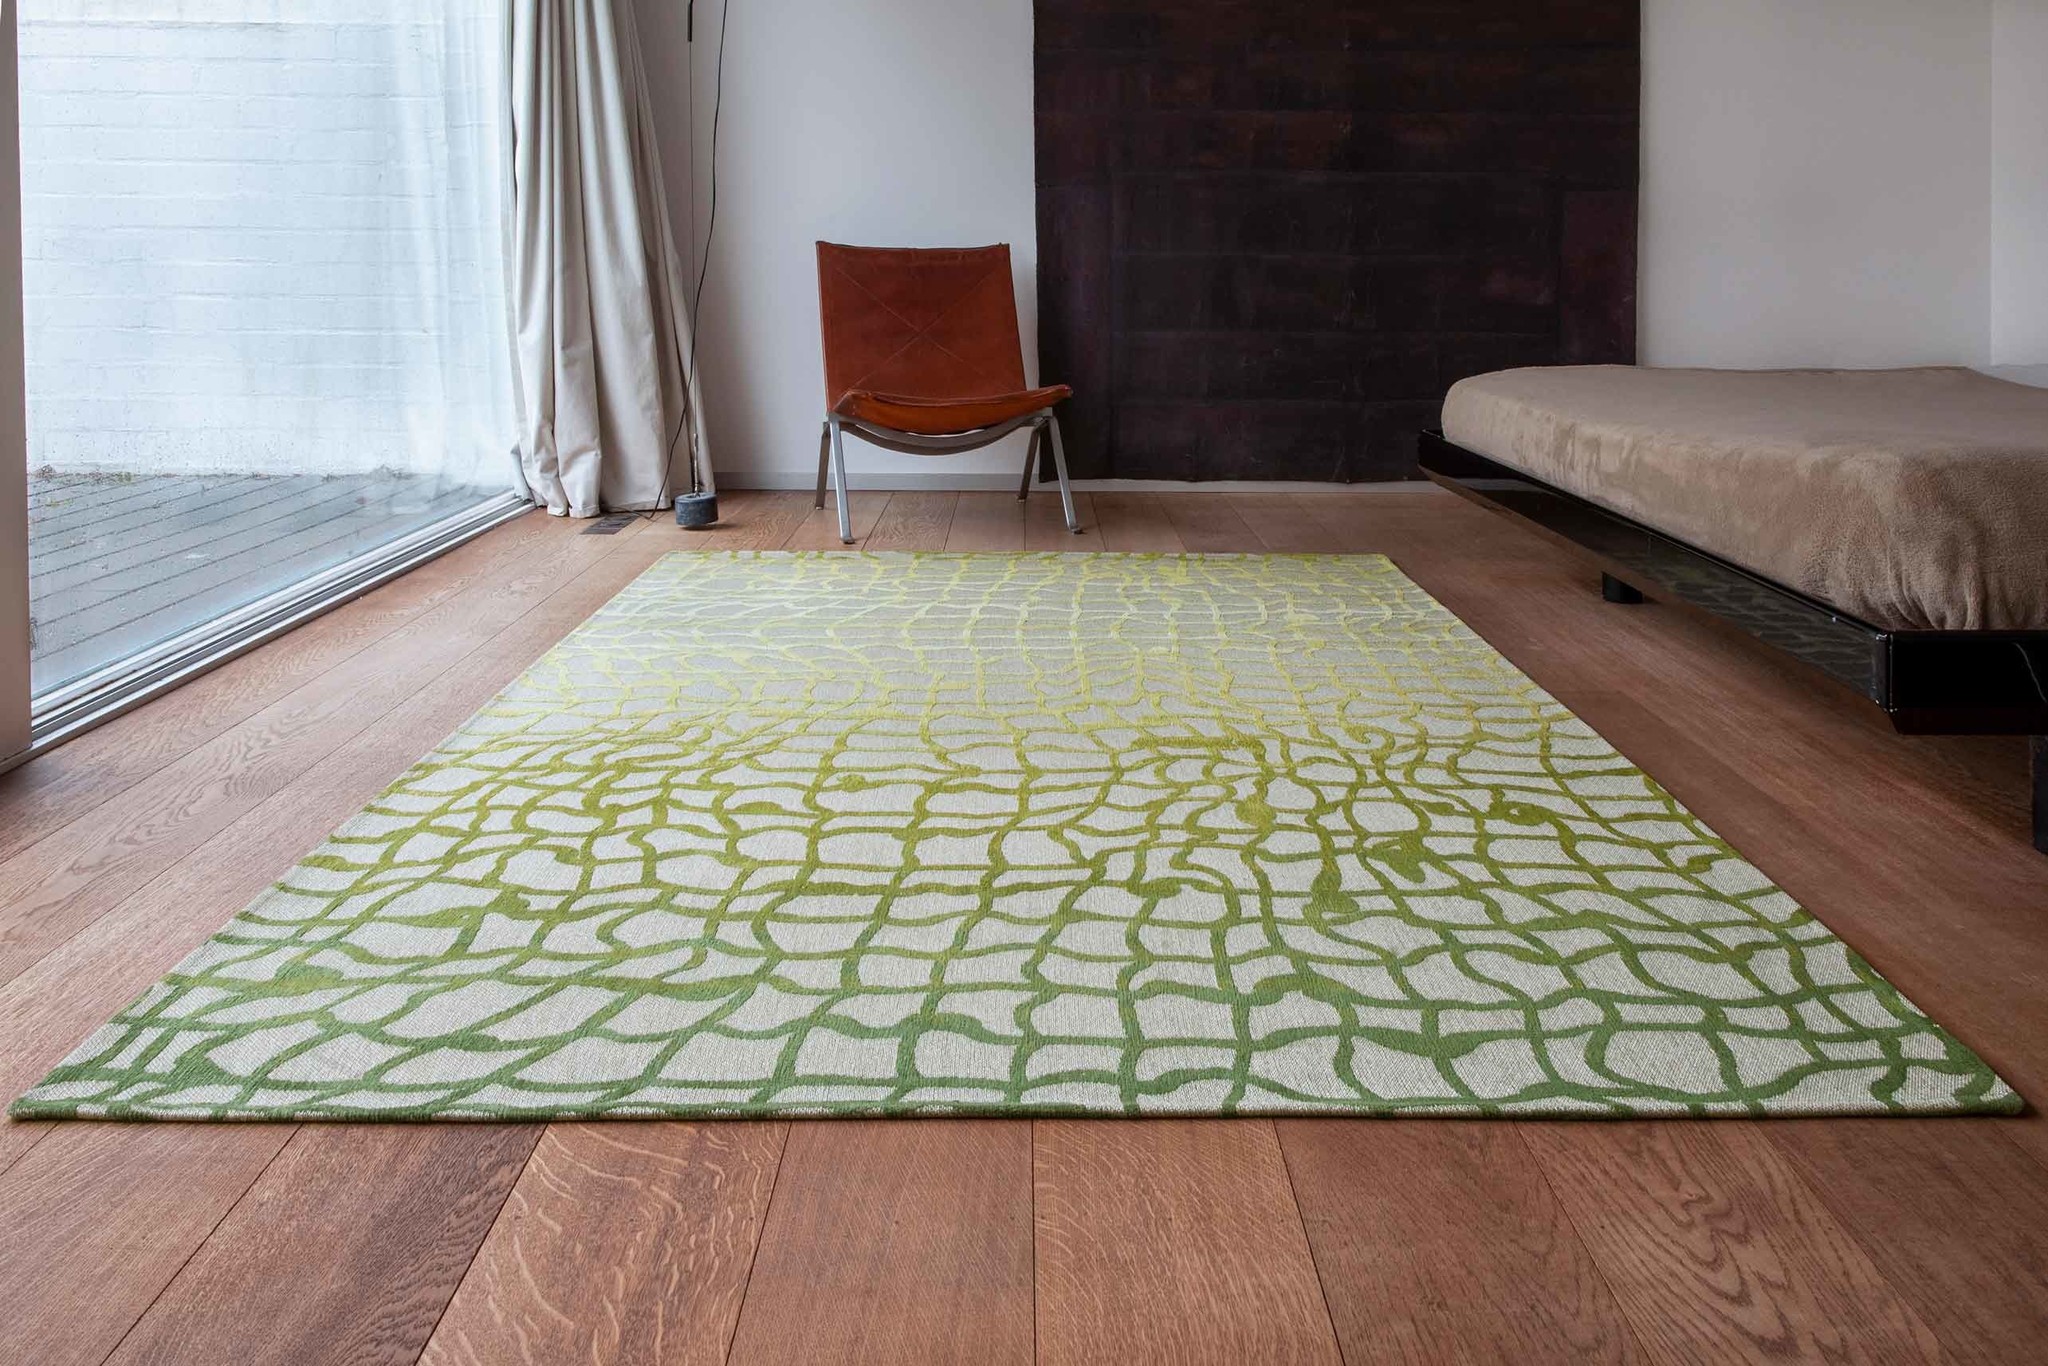 Green Flatwoven Rug ☞ Size: 5' 7" x 8' (170 x 240 cm)